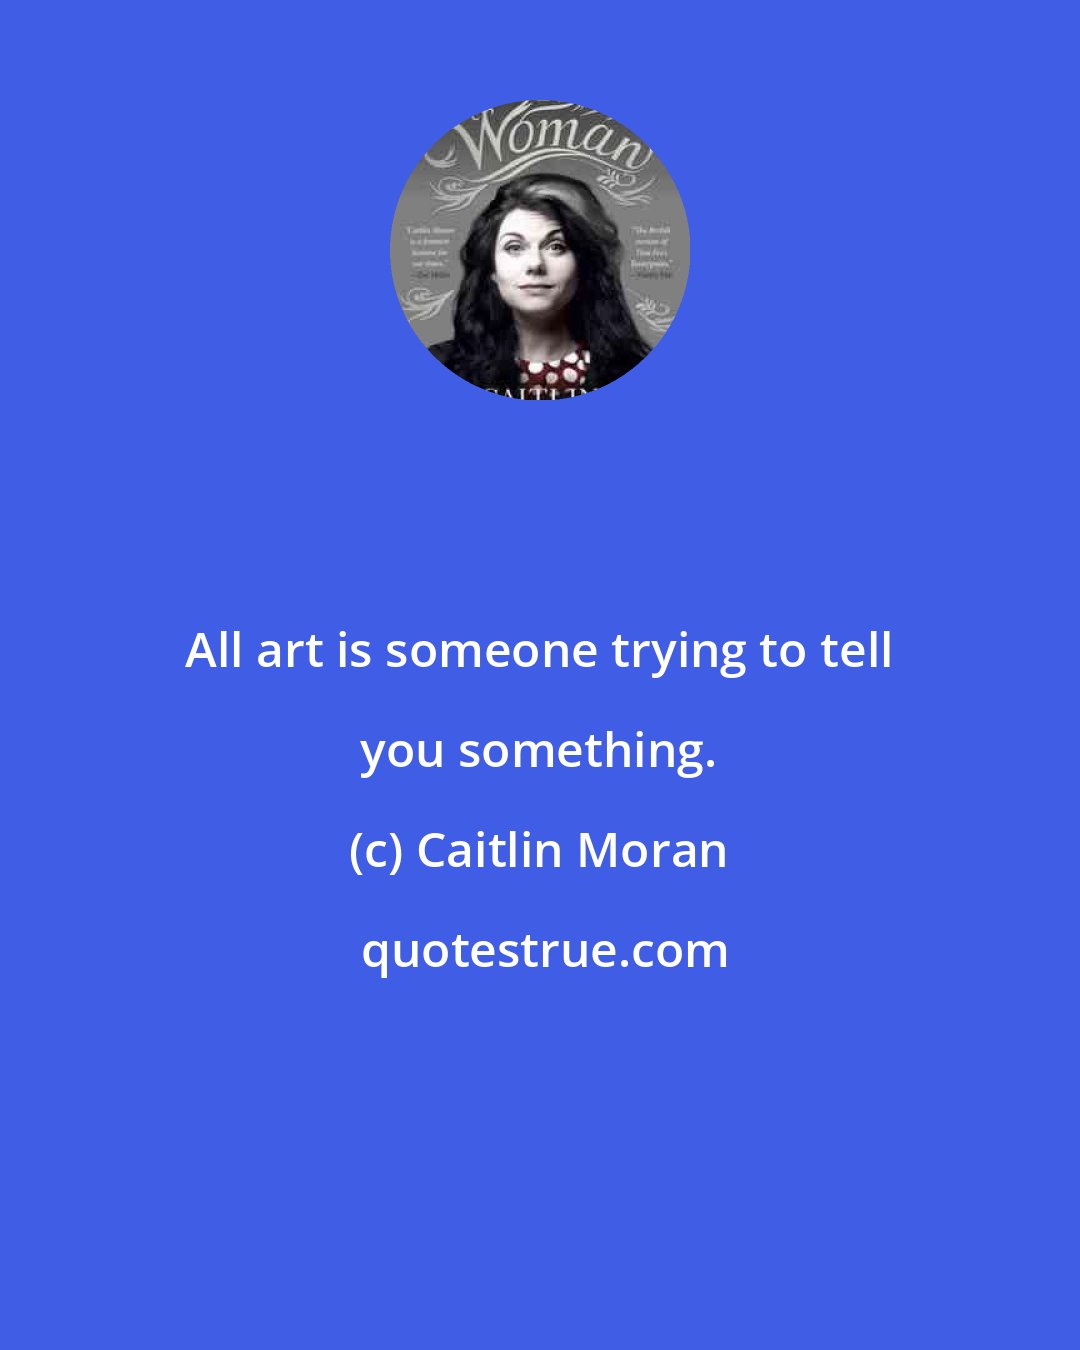 Caitlin Moran: All art is someone trying to tell you something.